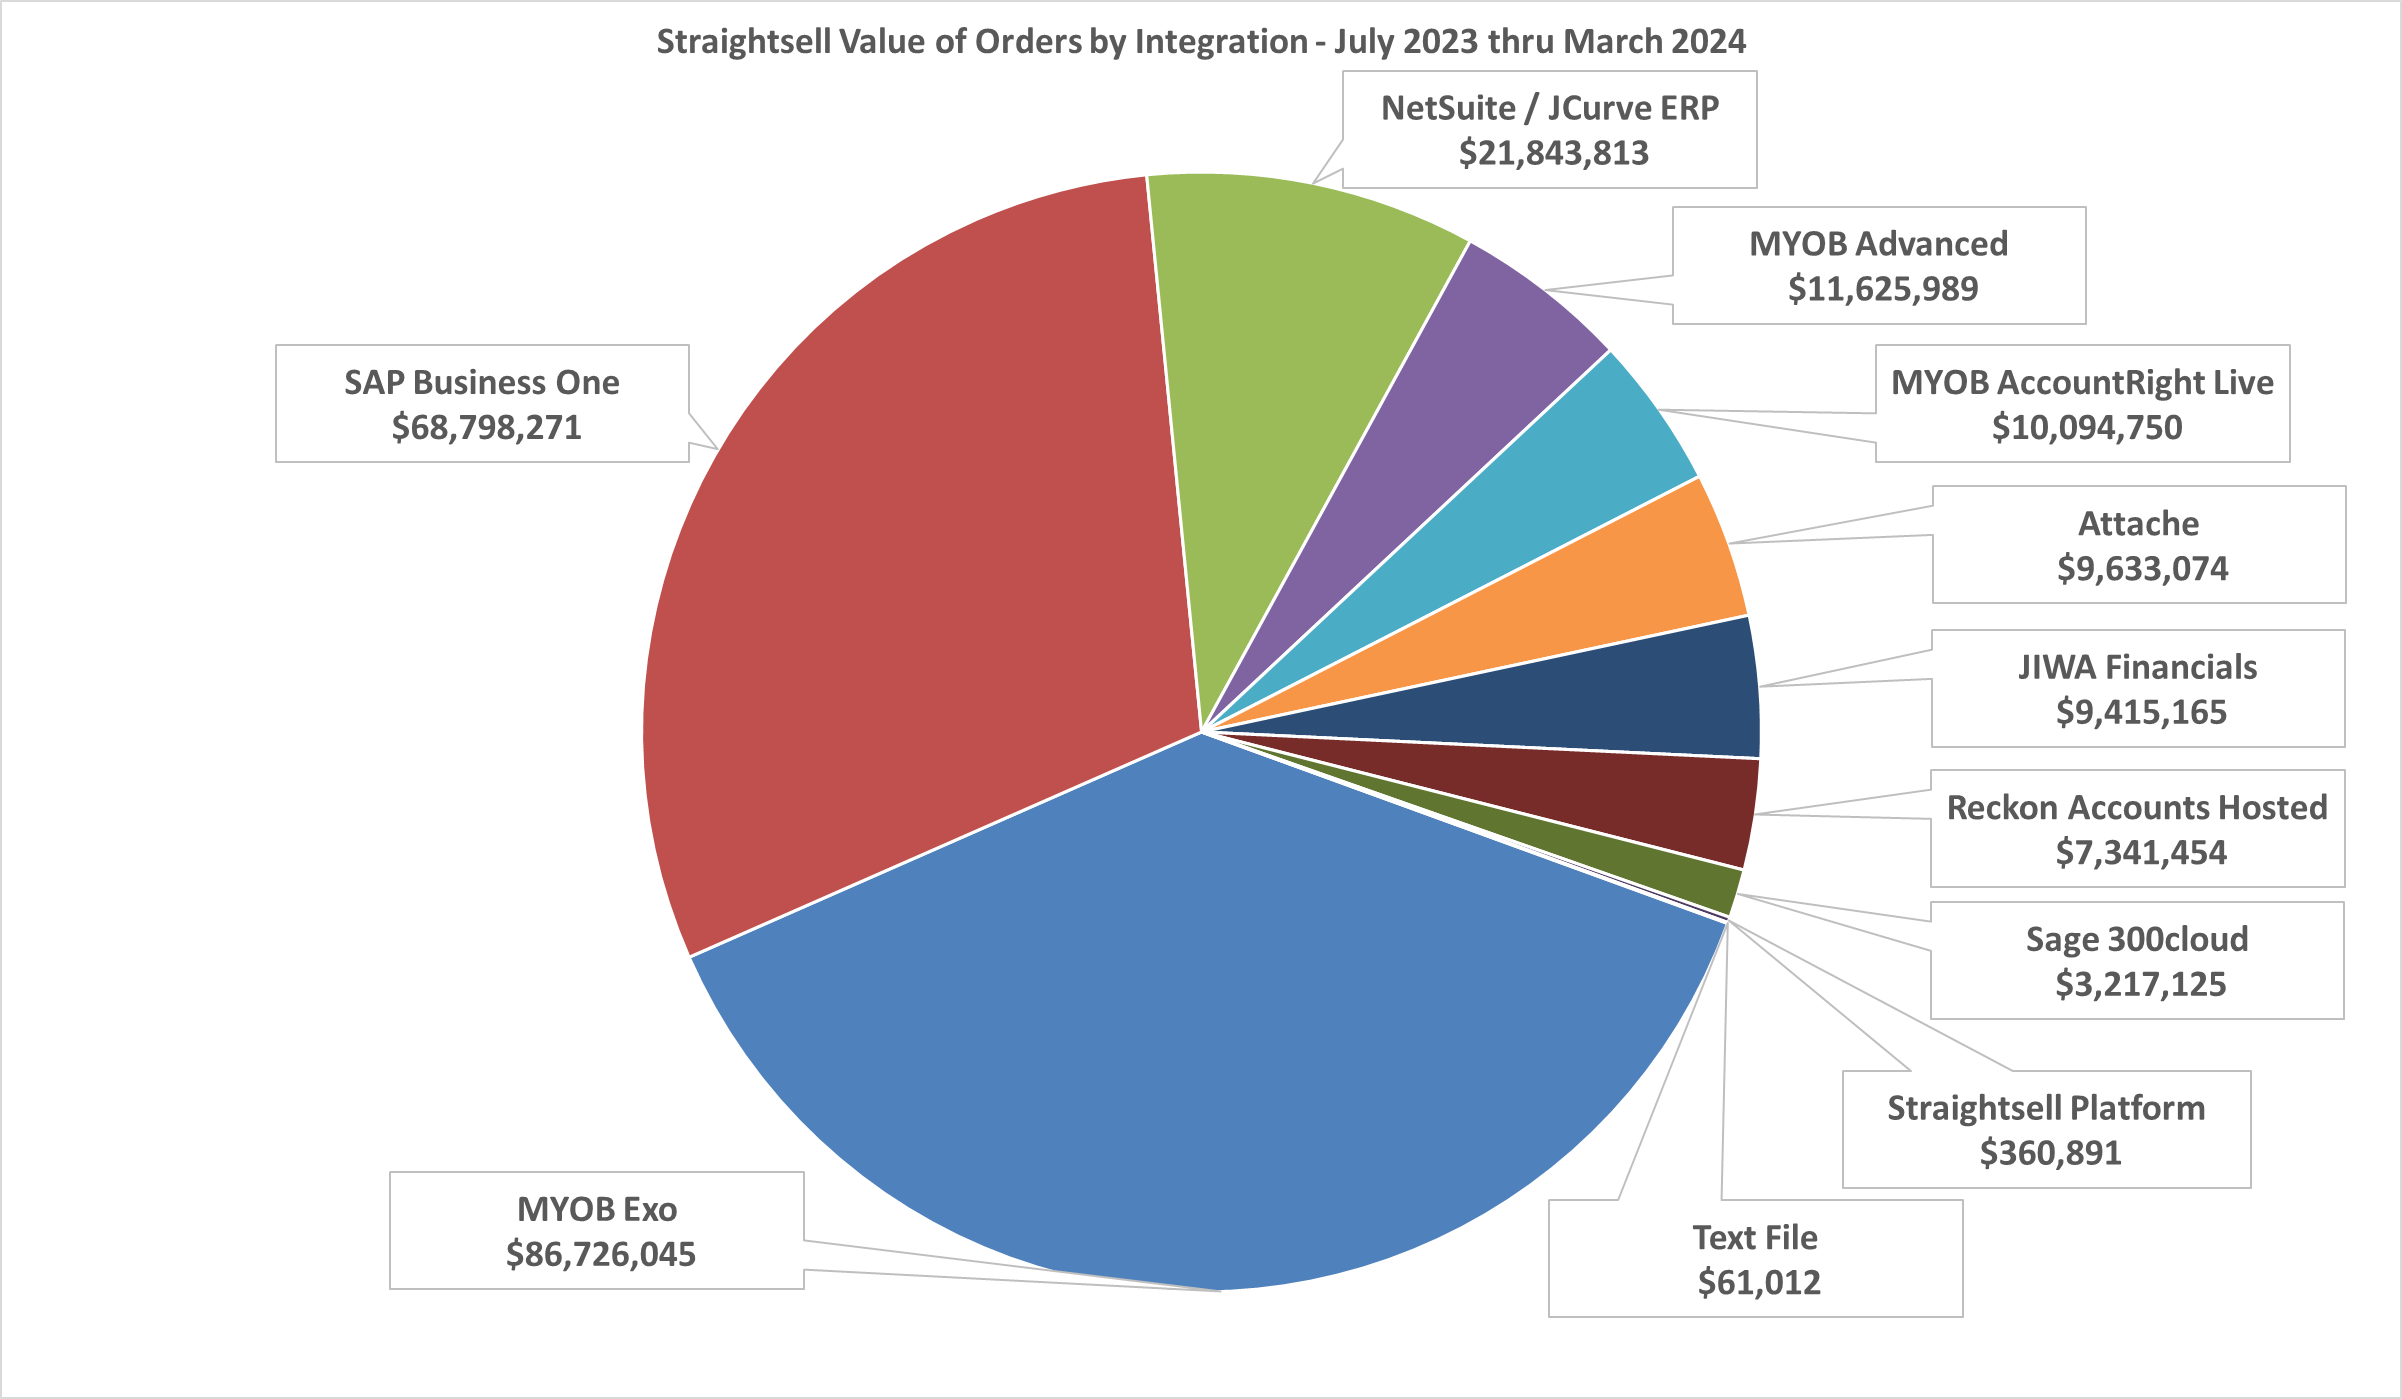 Straightsell Value of Orders by Integration - July 2023 thru March 2024